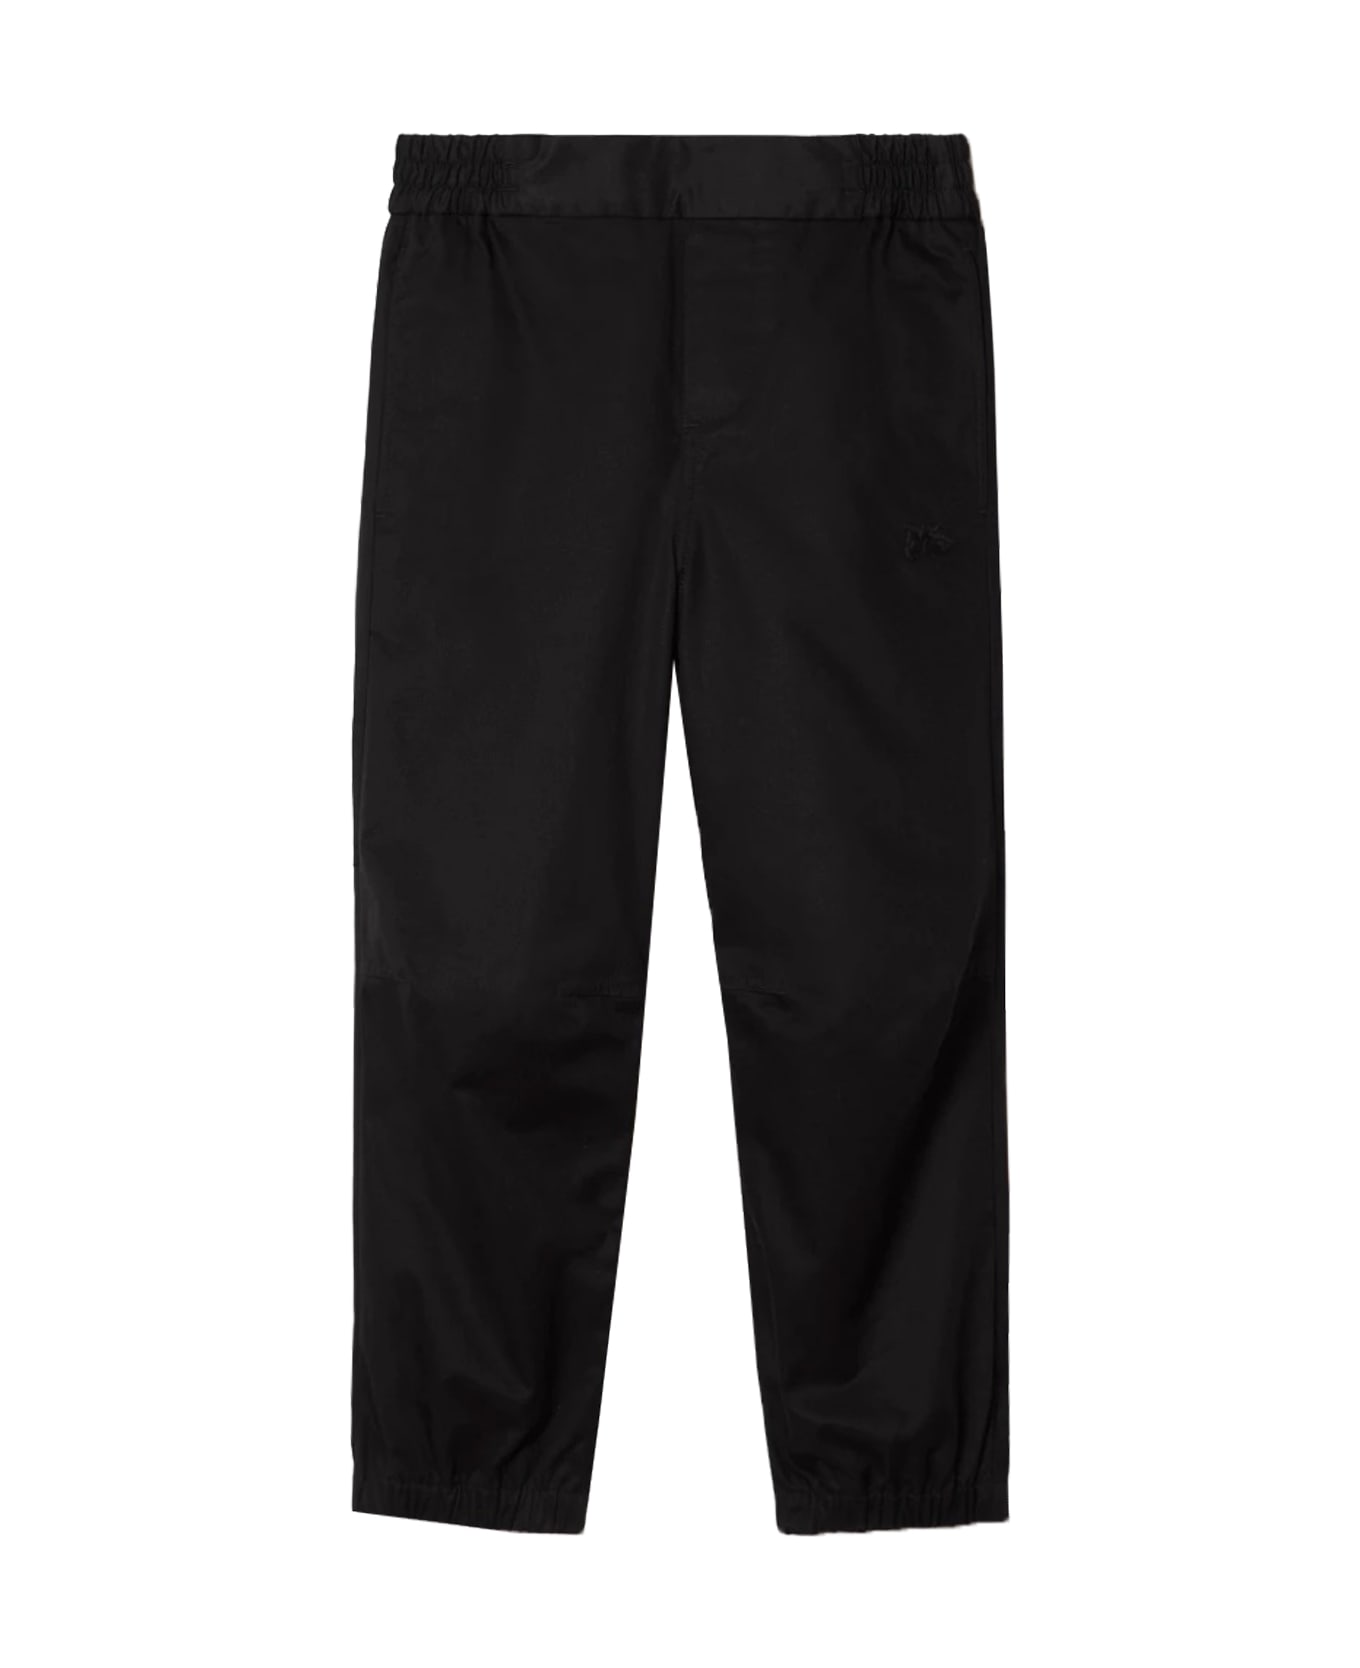 Burberry Cotton Twill Pants - Back